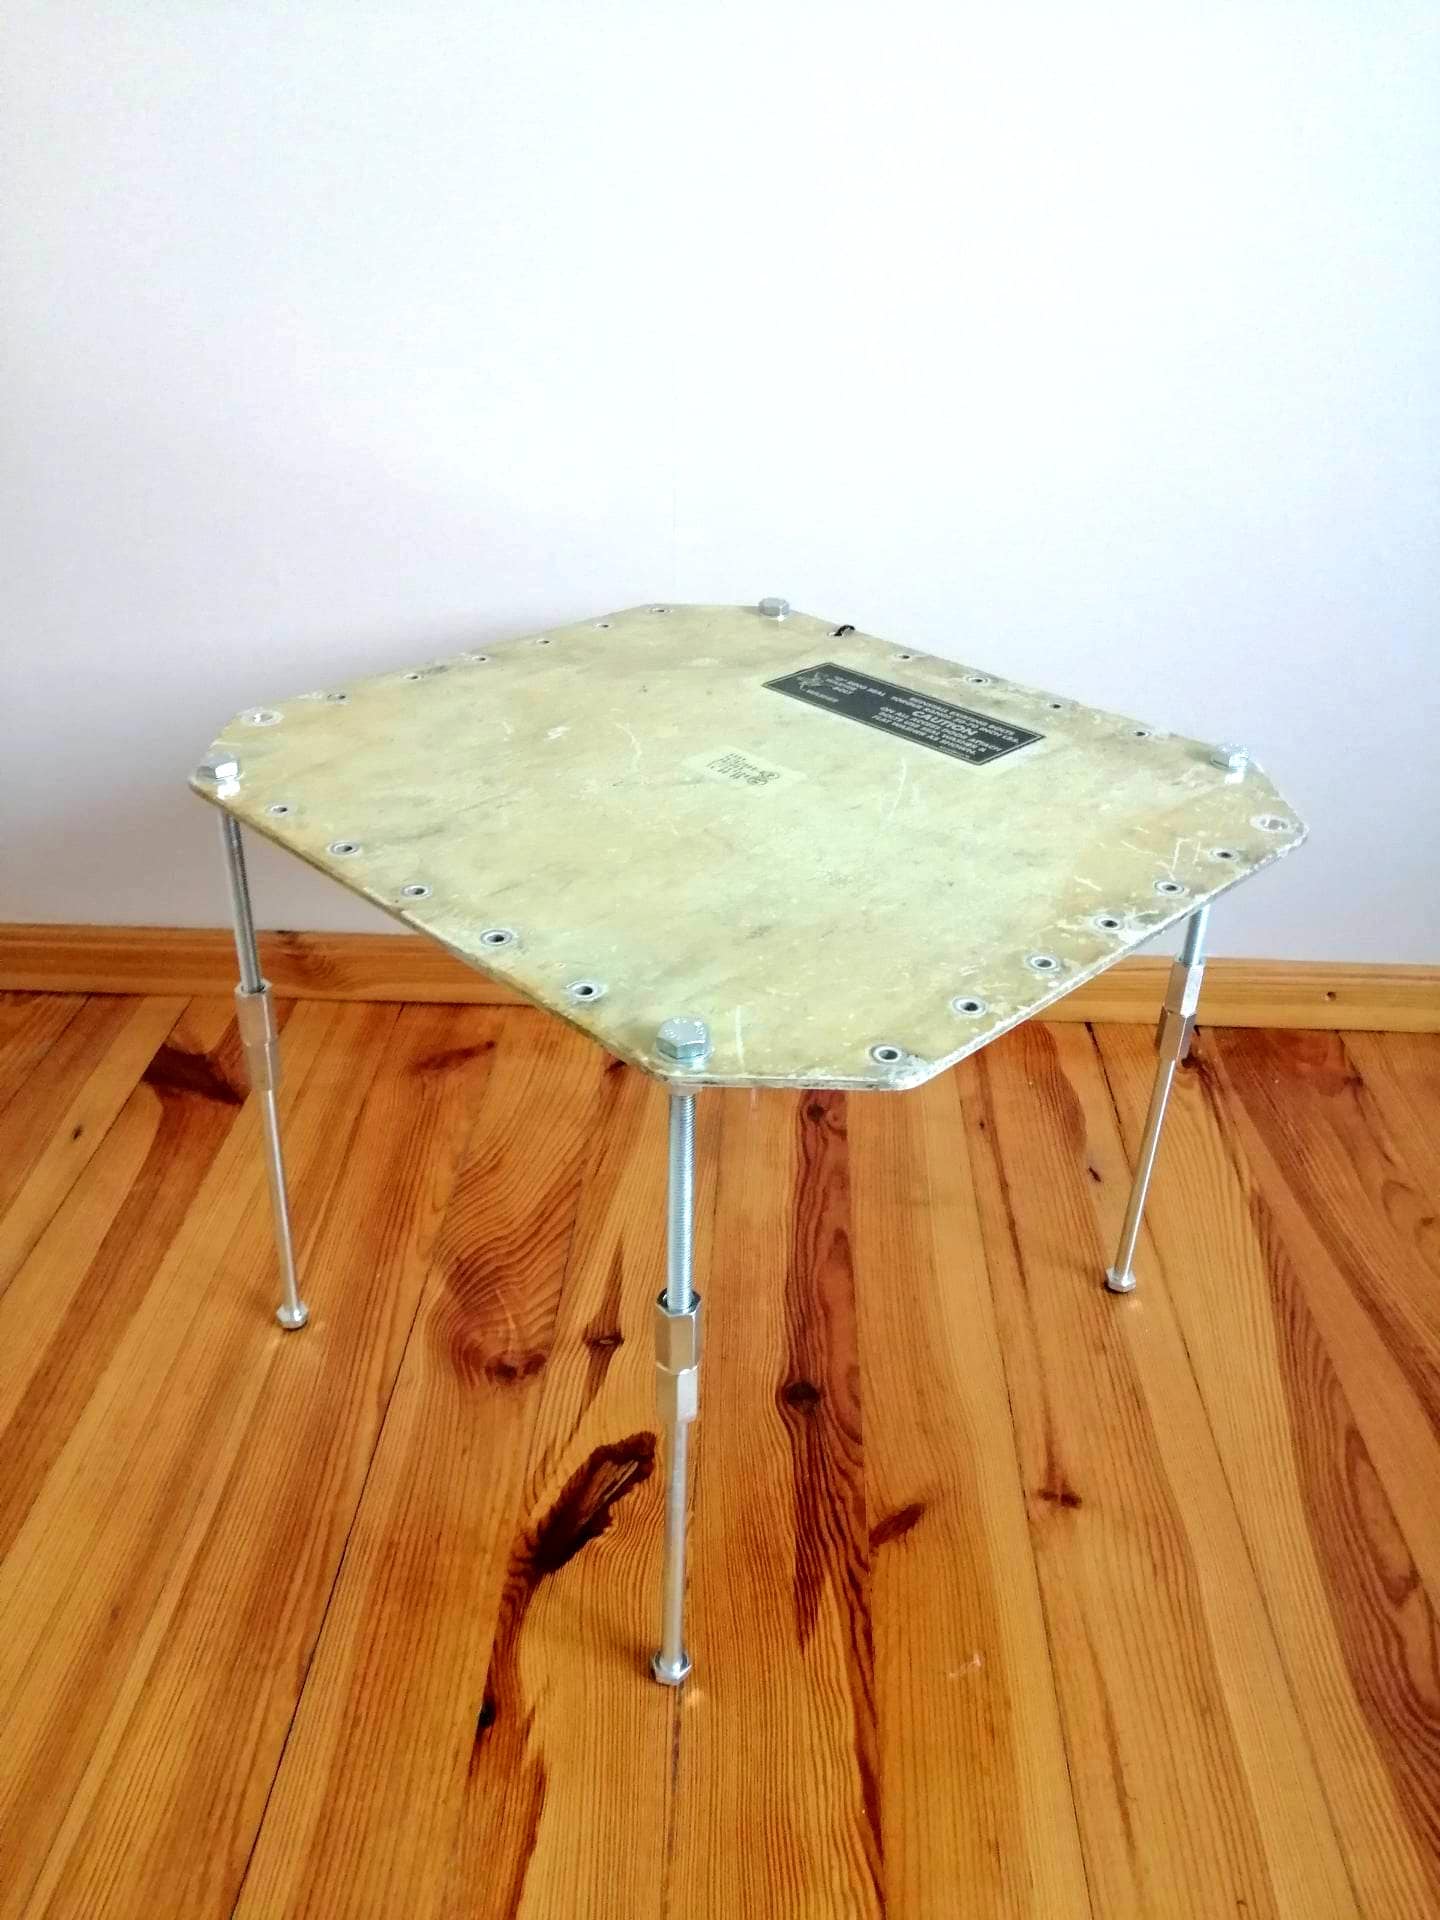 Aviation Side Table, Aircraft Coffee Table Made of Original Boeing 737 Access Panel Door - Airplane Parts